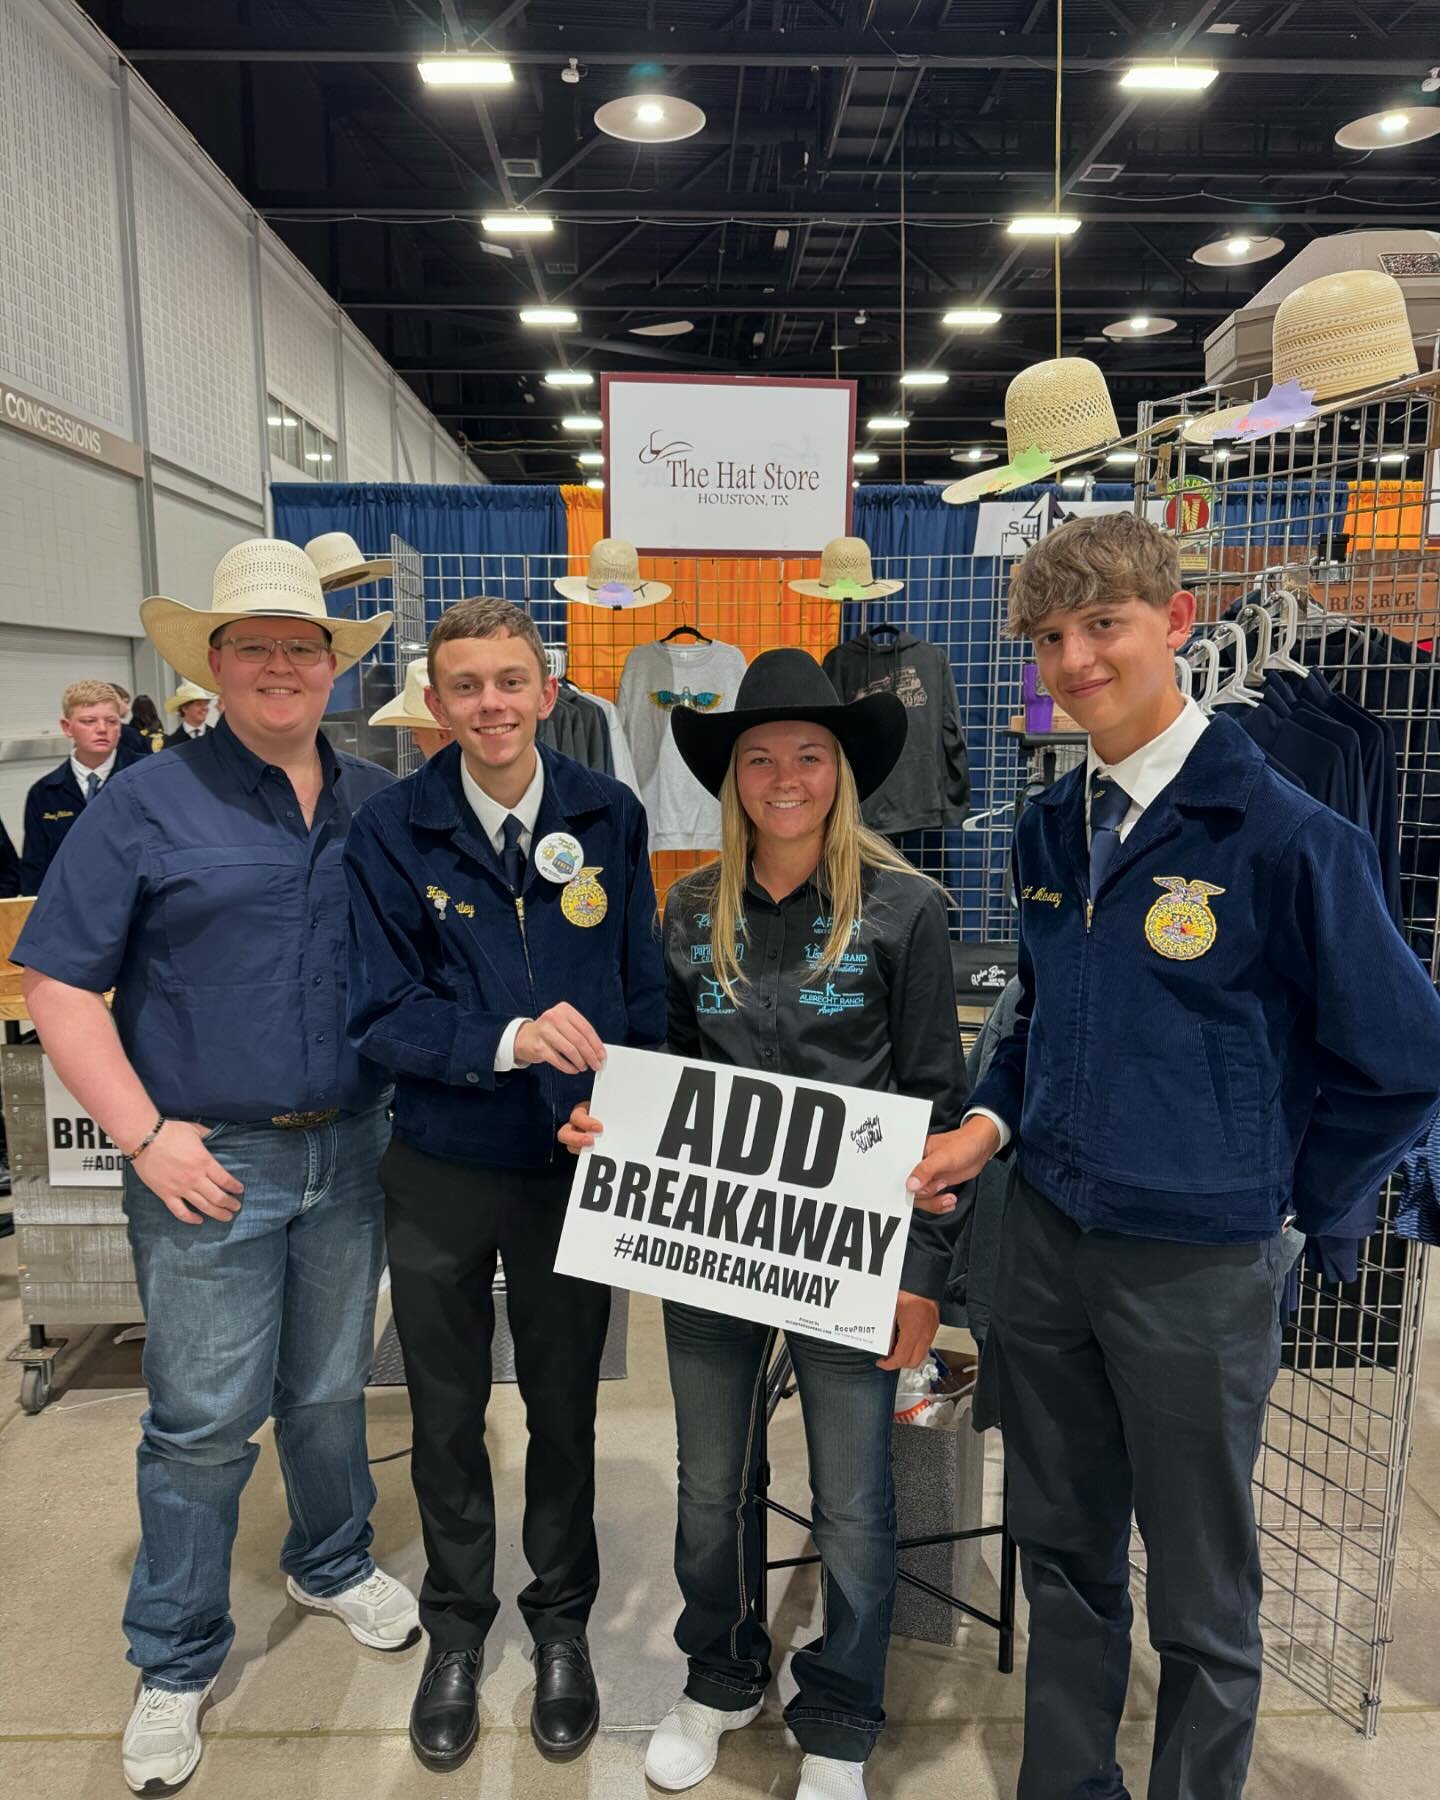 We had so much fun with @brayleeshepherd last week @okffa.  Blaine and Jordan shaped lots of Rodeo Bum straws from The Hat Store.  Thank you @superior_tb for letting us share in the fun! 

#straws #hats #cowboyhats #cowgirl #cowboy #felts #ballcaps #